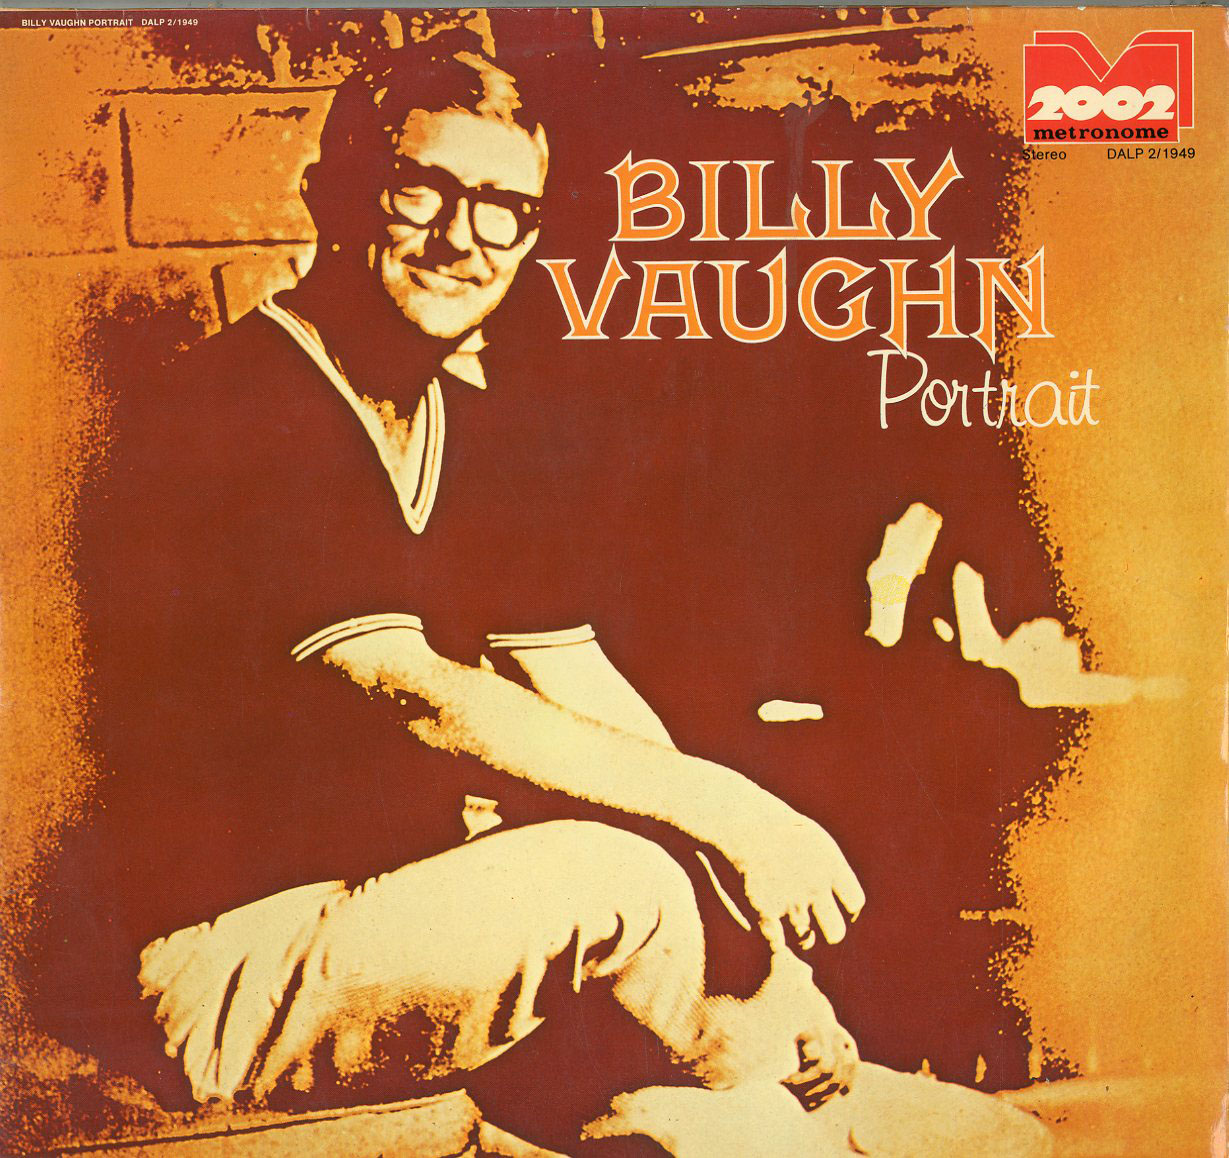 Albumcover Billy Vaughn & His Orch. - Portrait (DLP) Metronome 2002